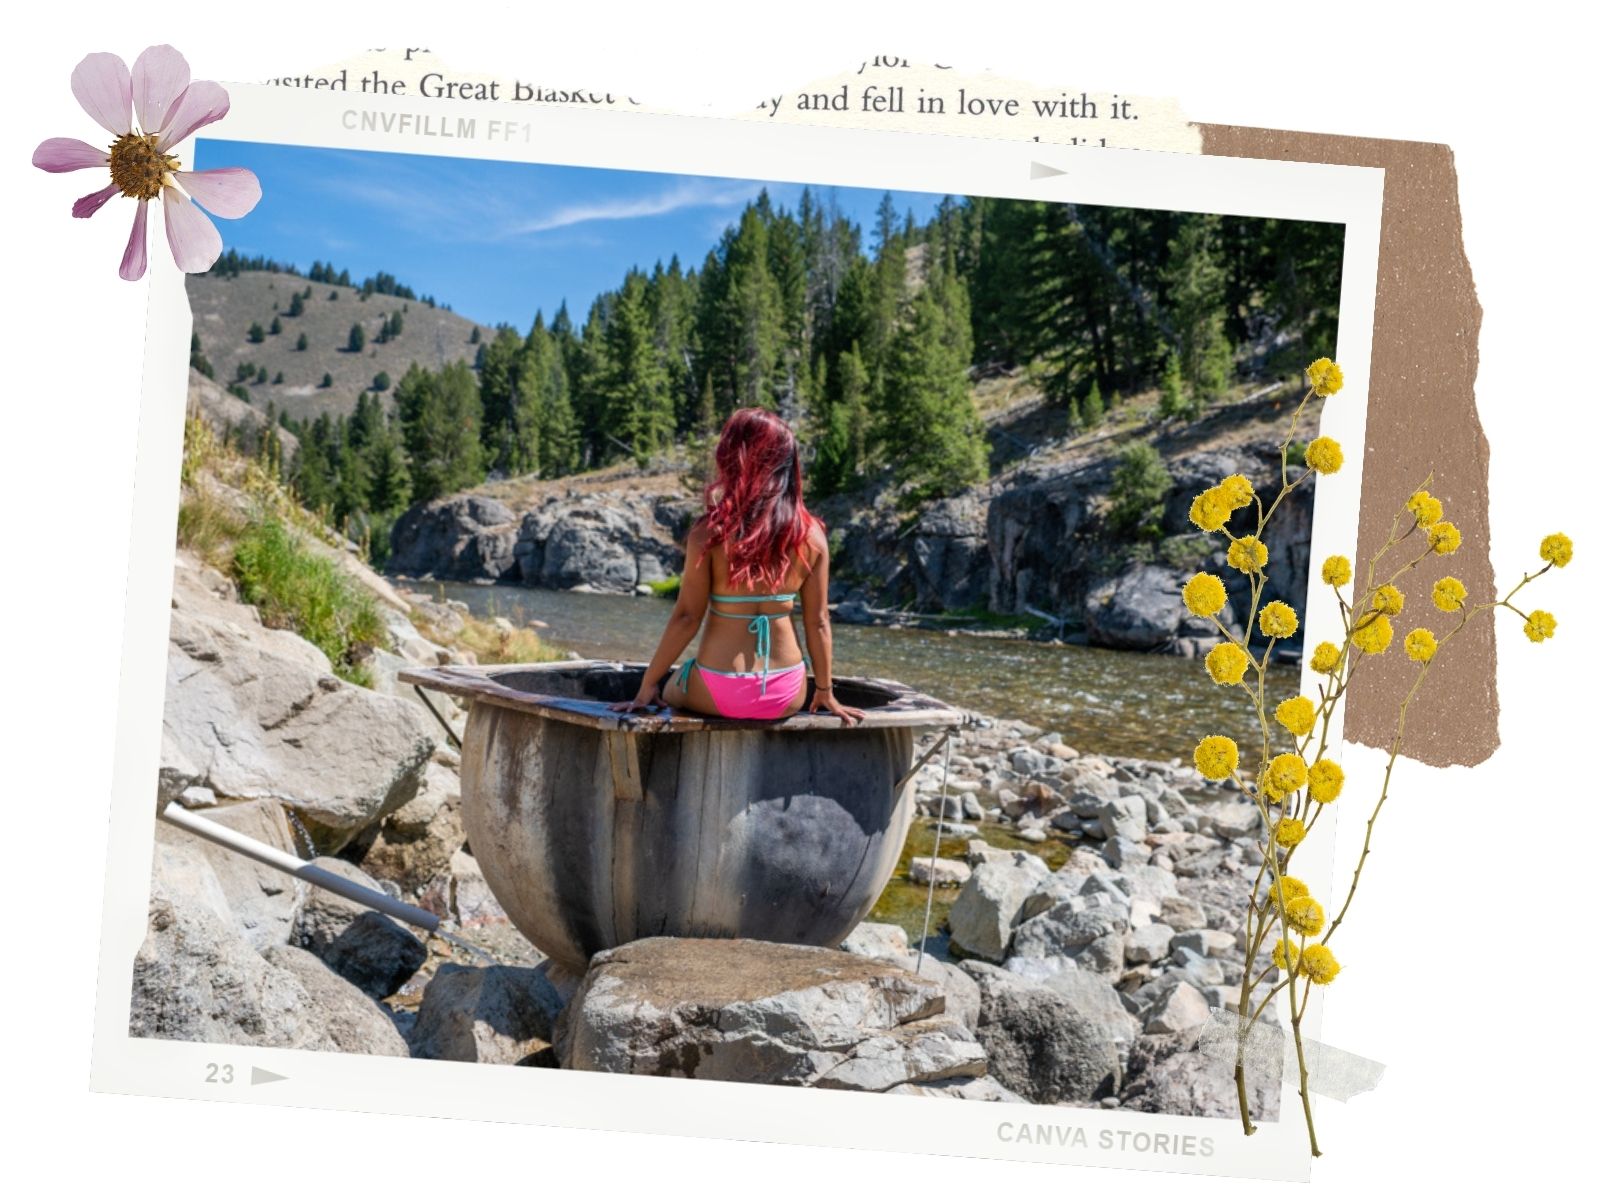 5 Awesome Hot Springs Near Stanley, Idaho: Boat Box Hot Springs